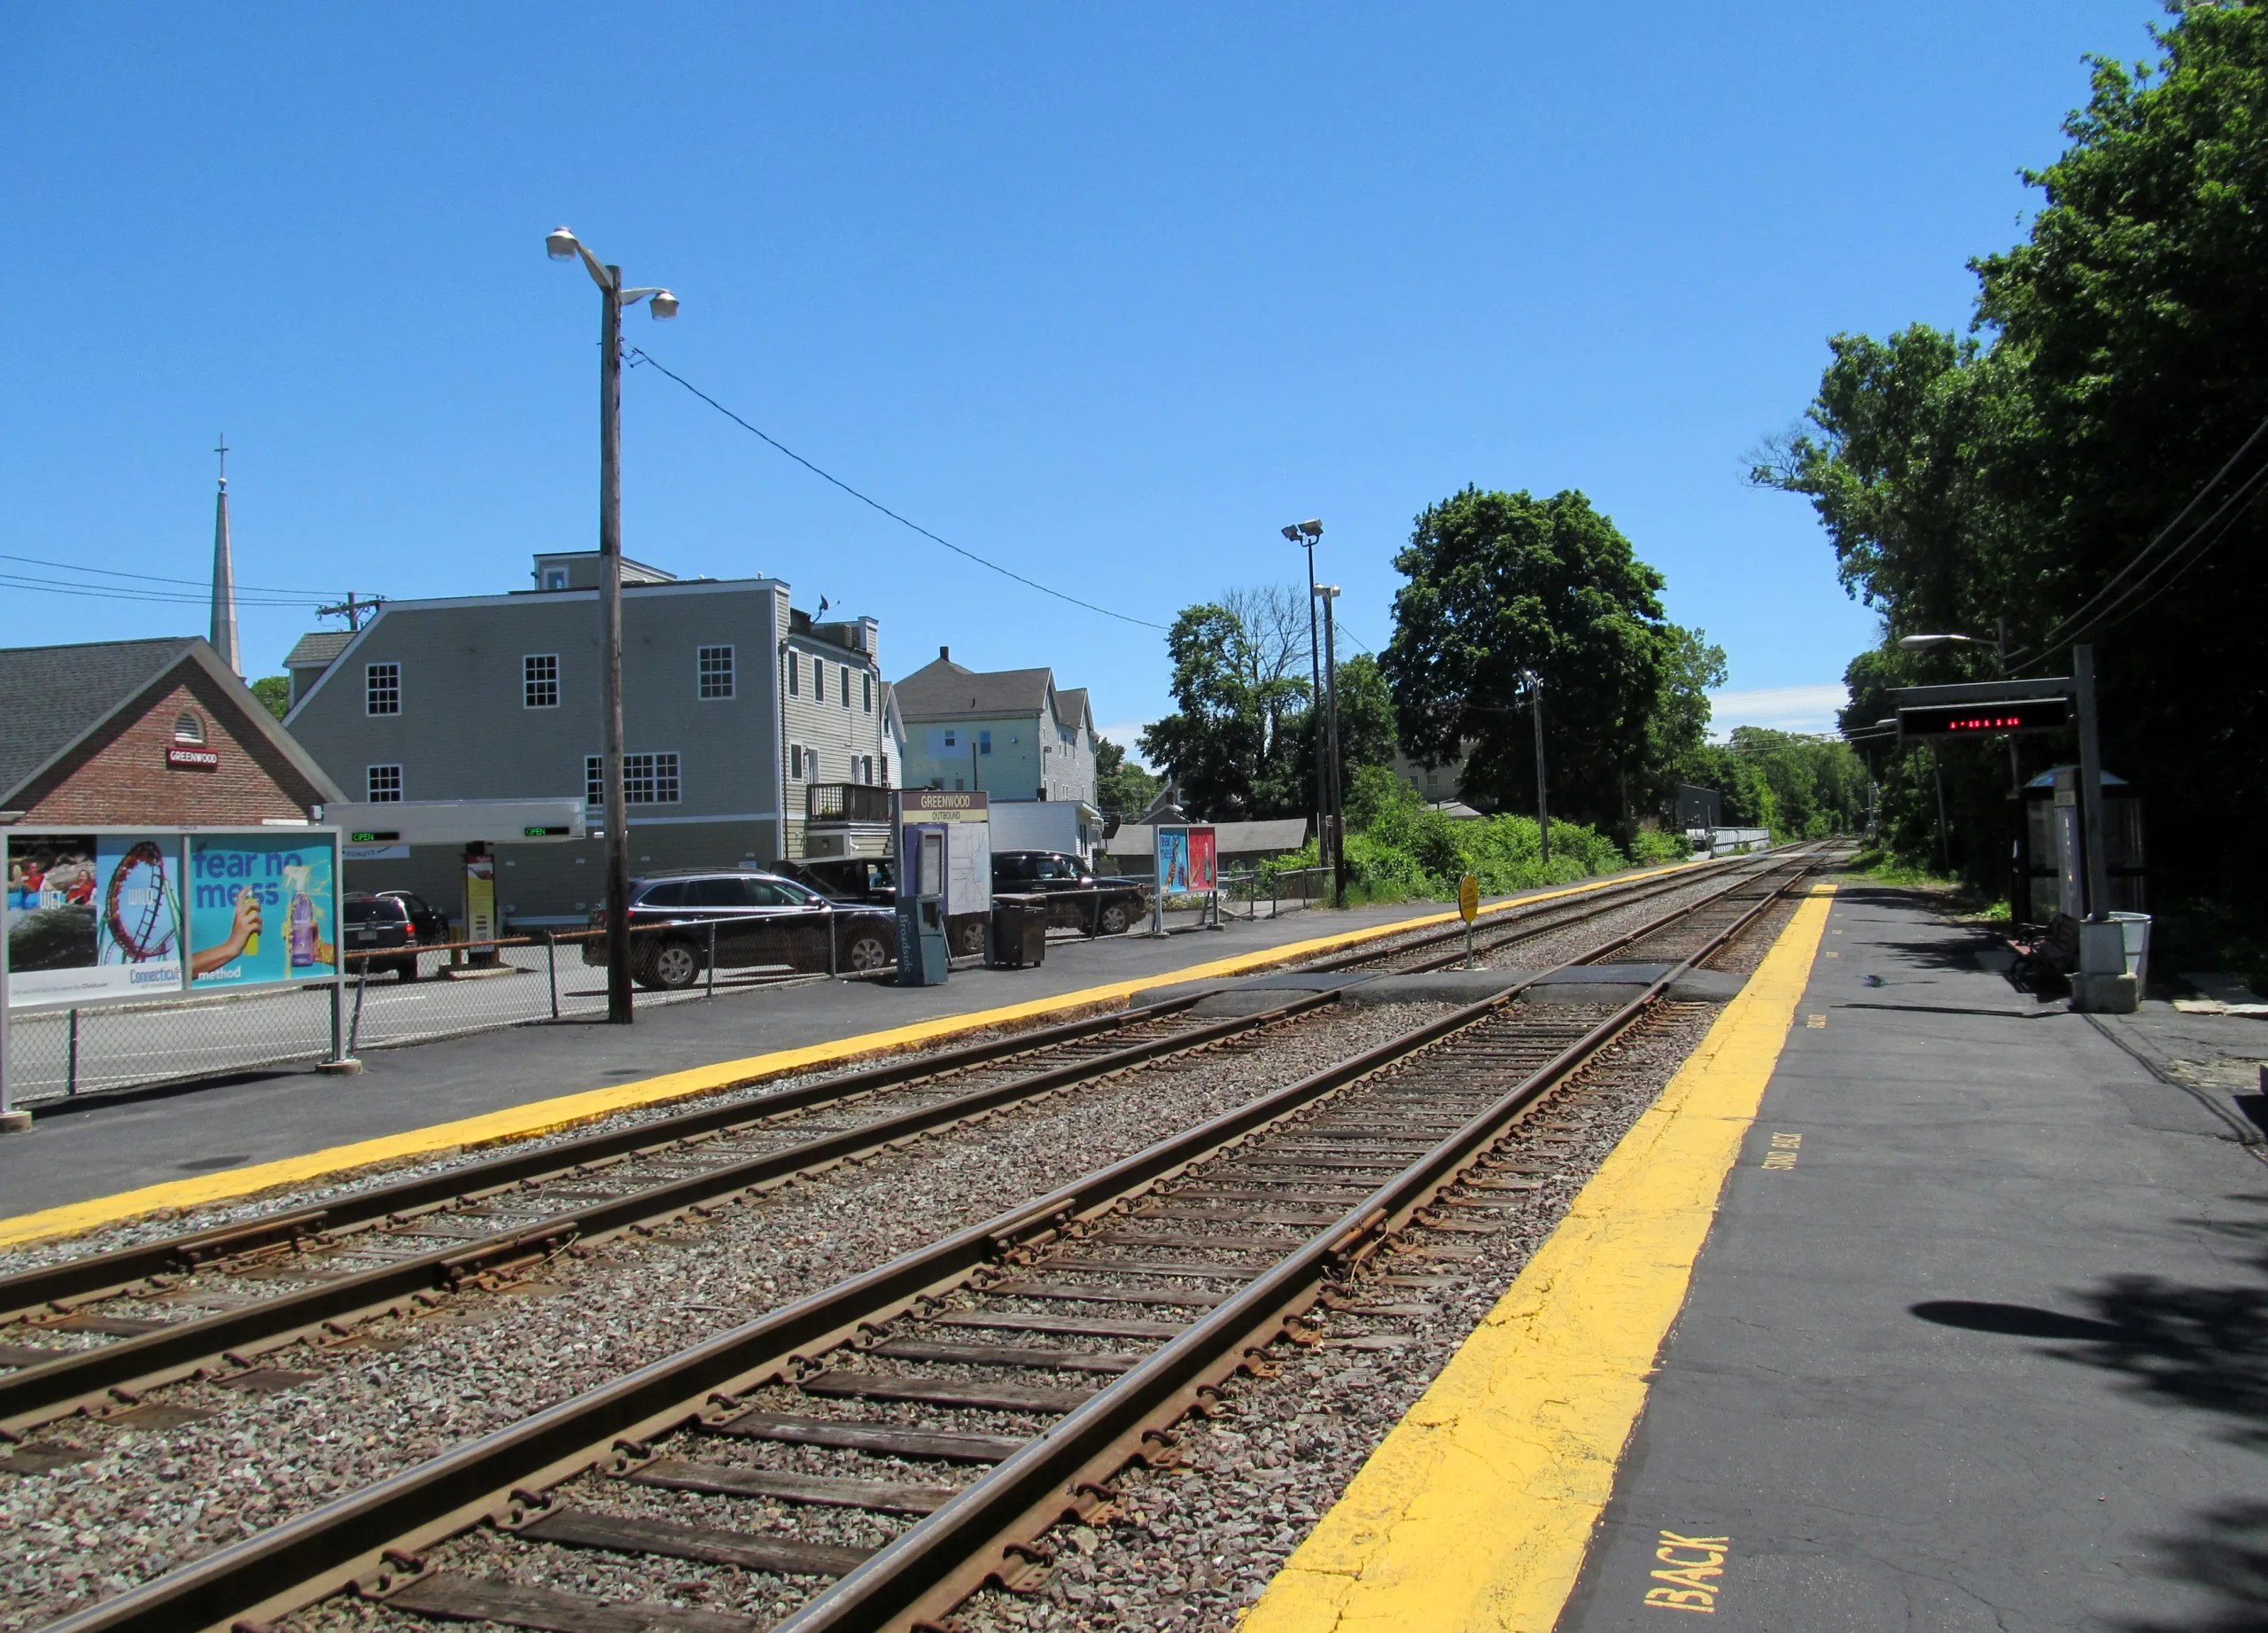 CommunityScale joins MHP to assist the Town of Wakefield with MBTA Communities compliance